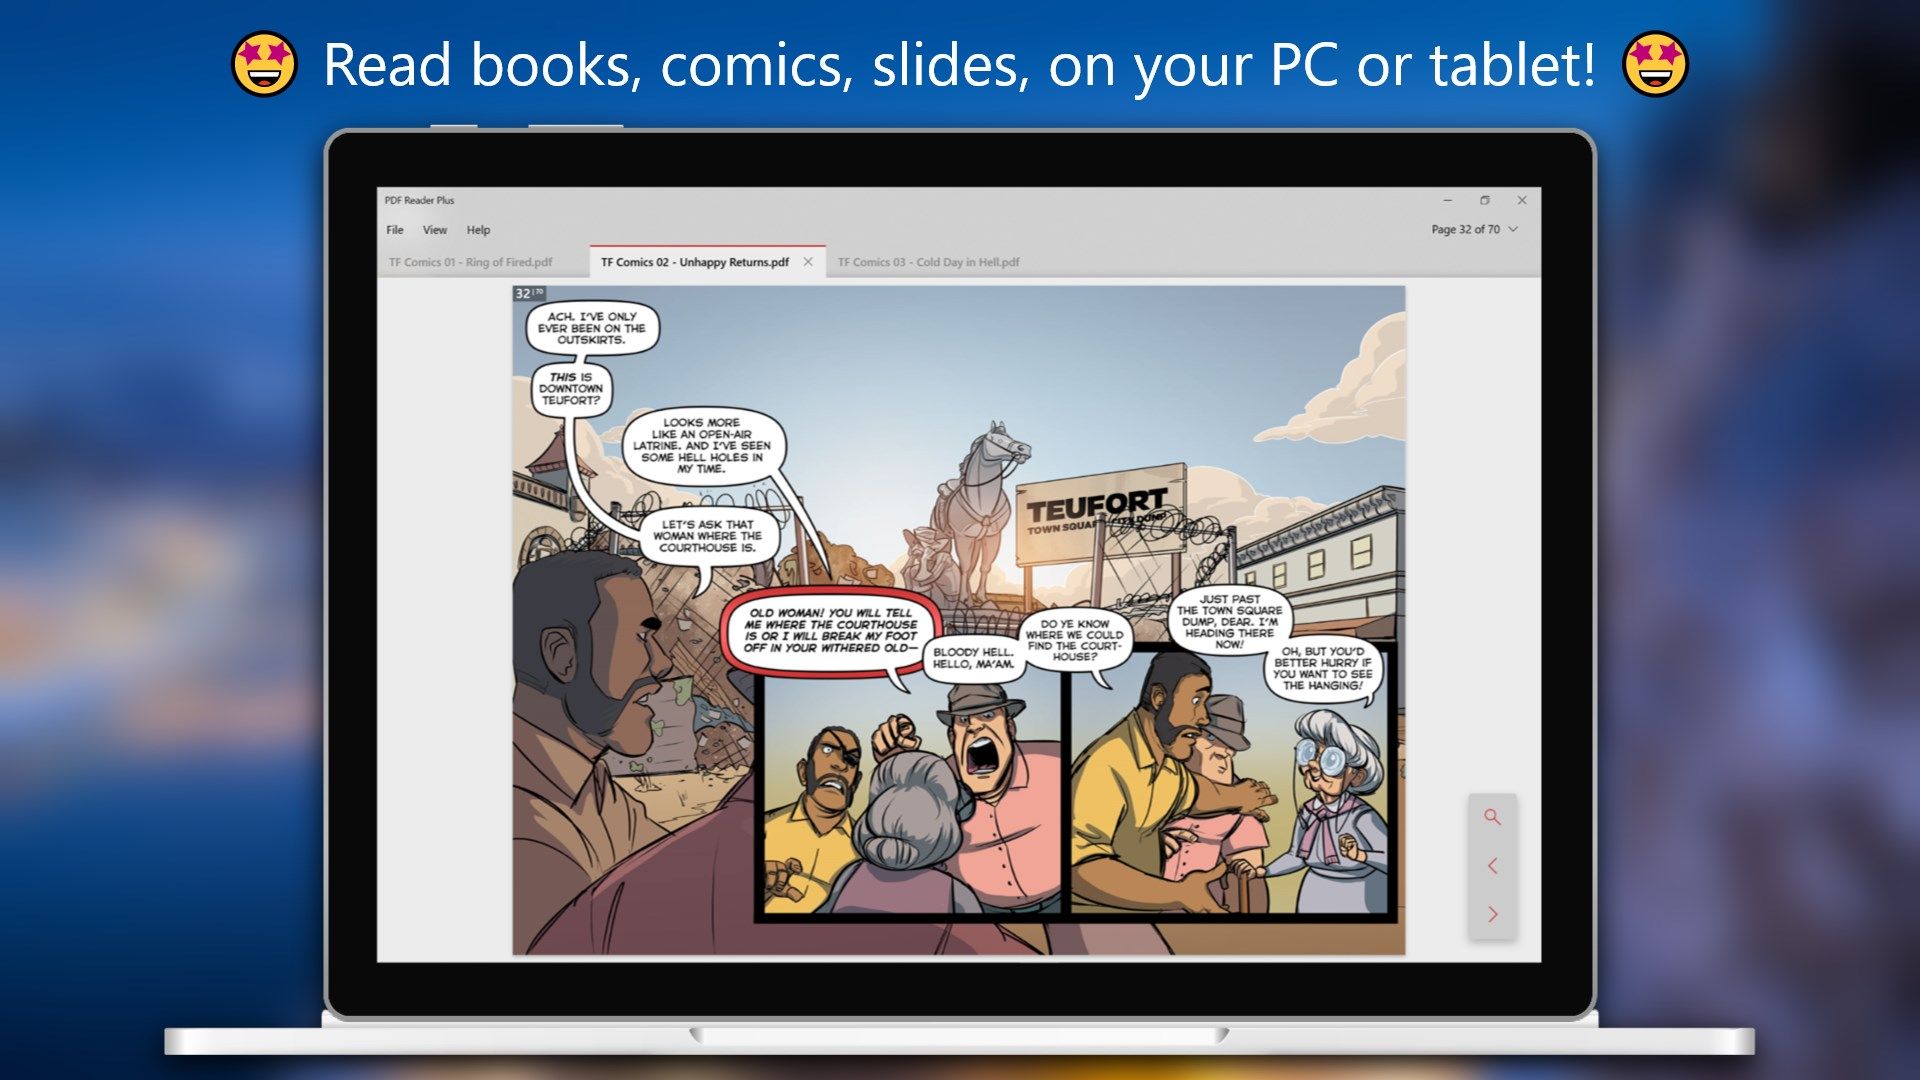 Read books, comics, slides, on your PC or tablet!